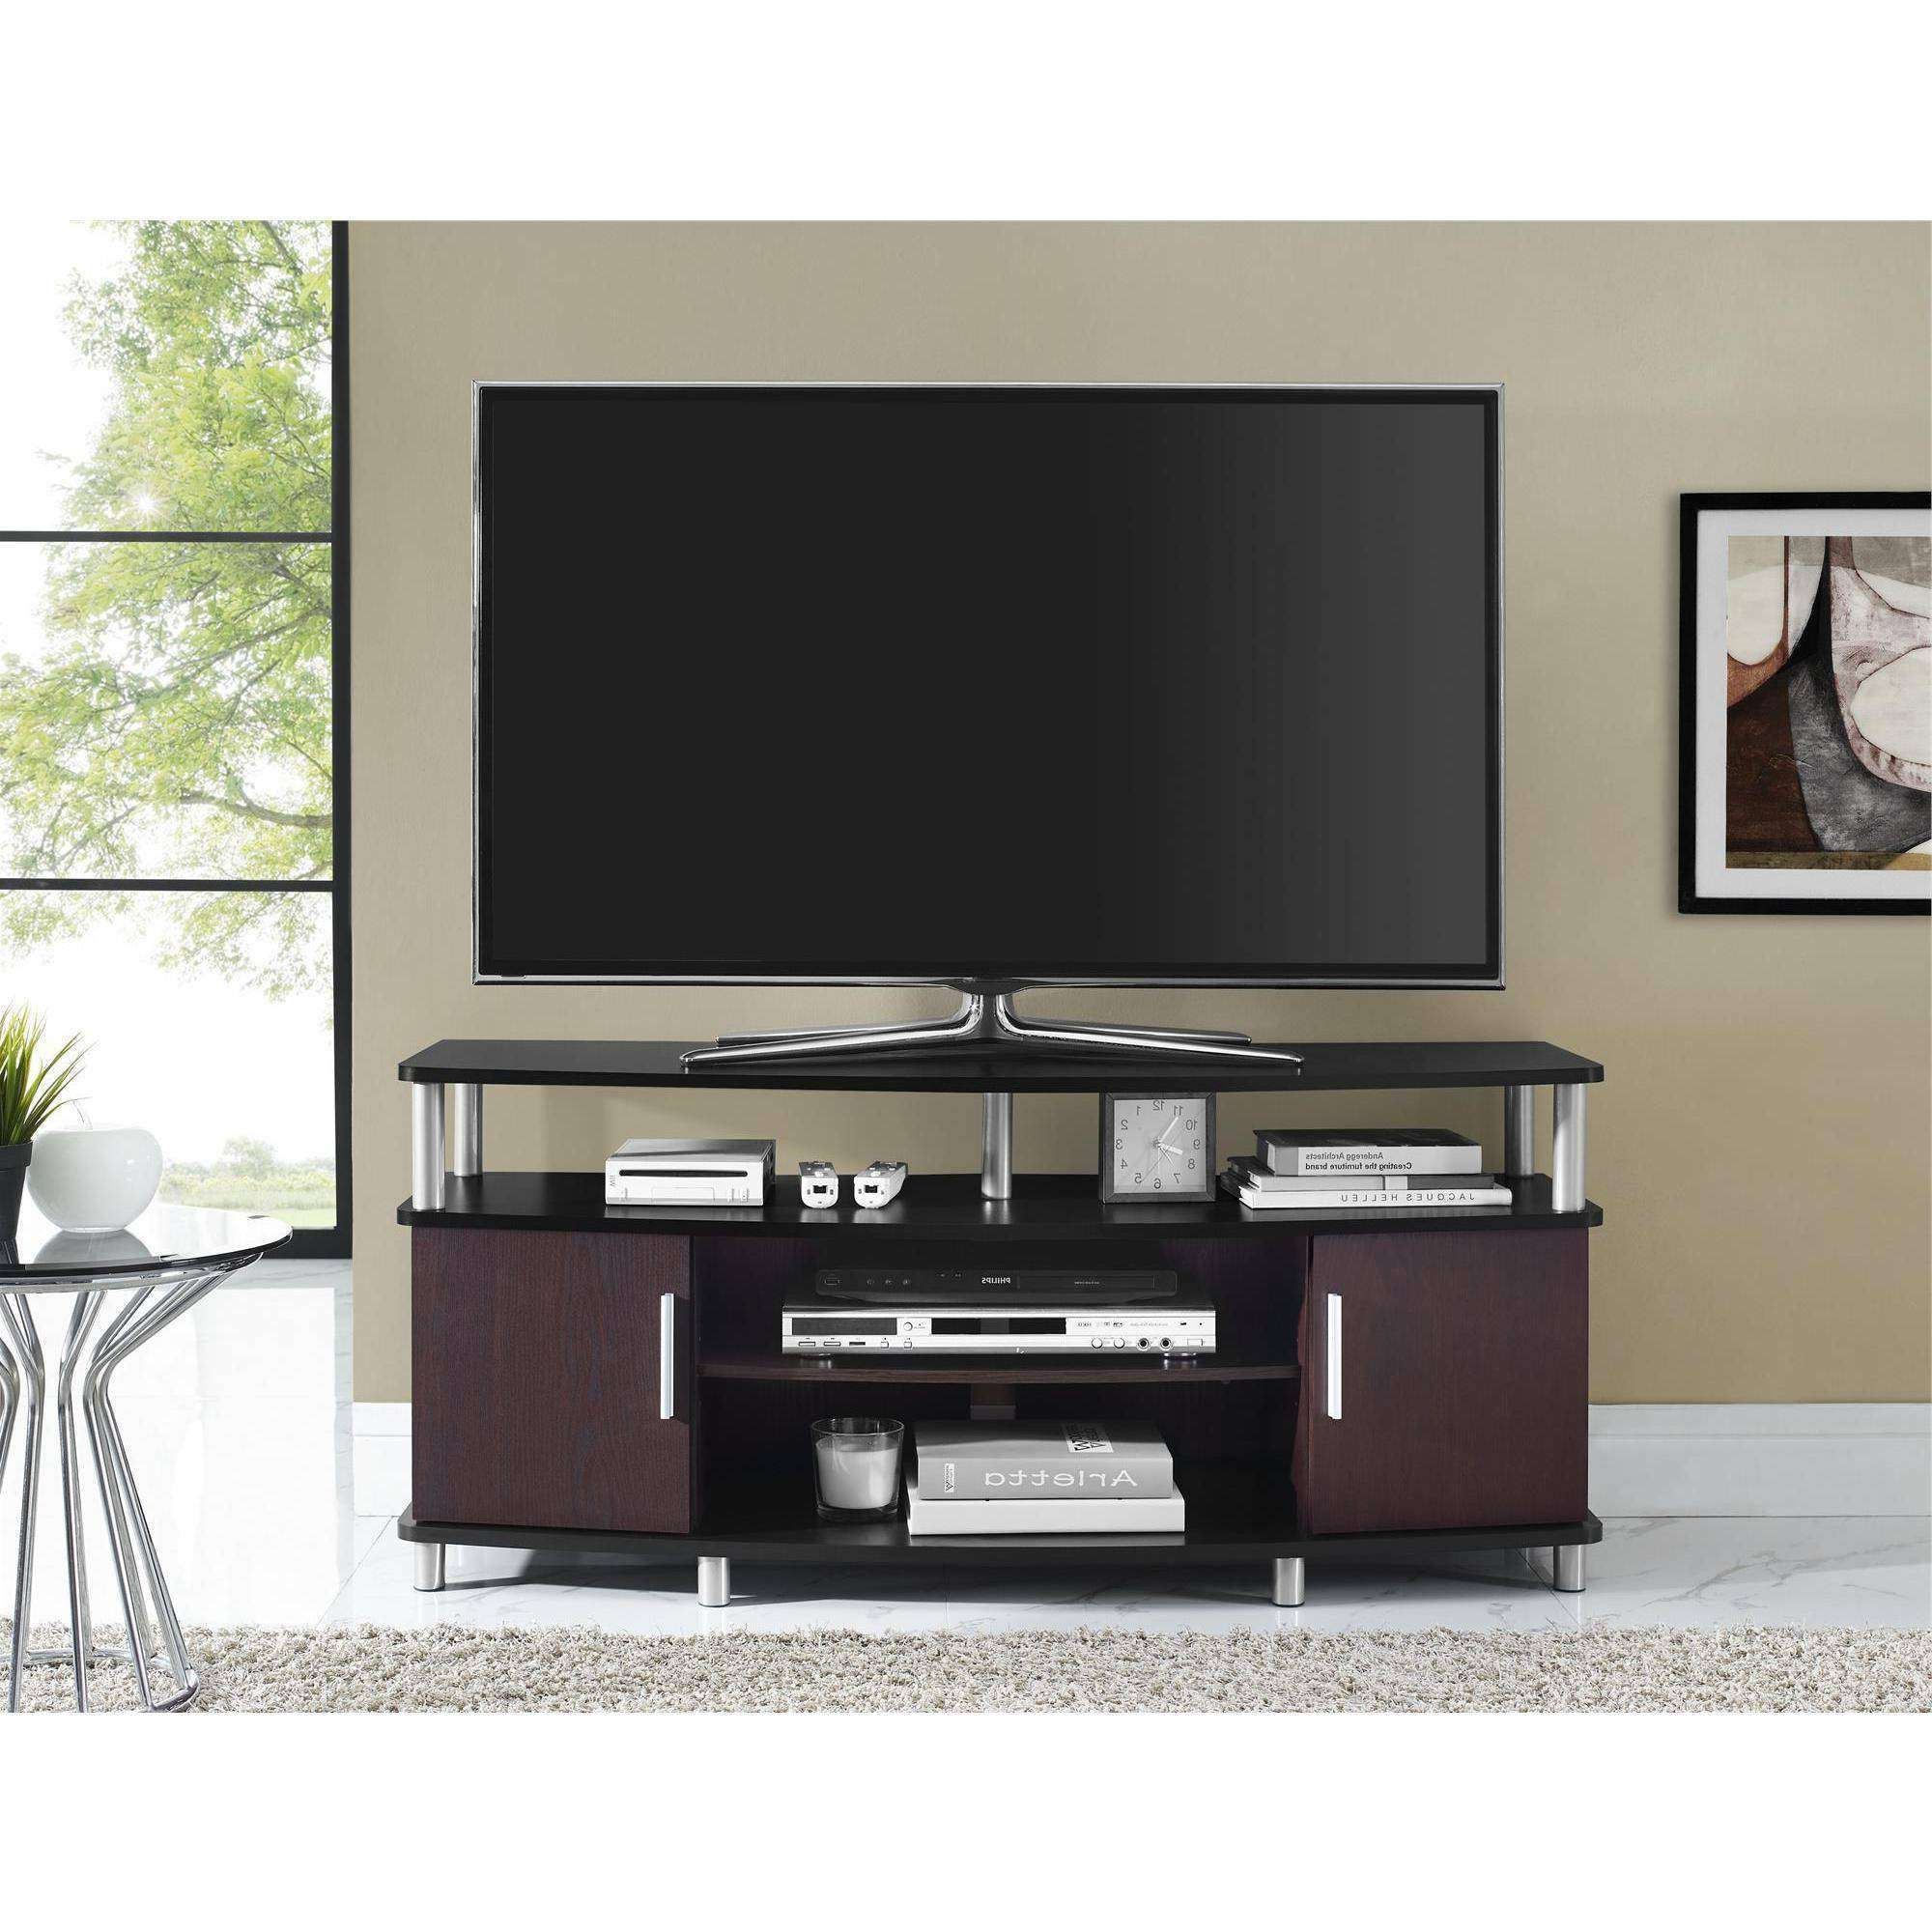 Tv Stand : 41 Unique Black Tv Stand For 50 Inch Tv Images Intended For 50 Inch Corner Tv Cabinets (Gallery 13 of 20)